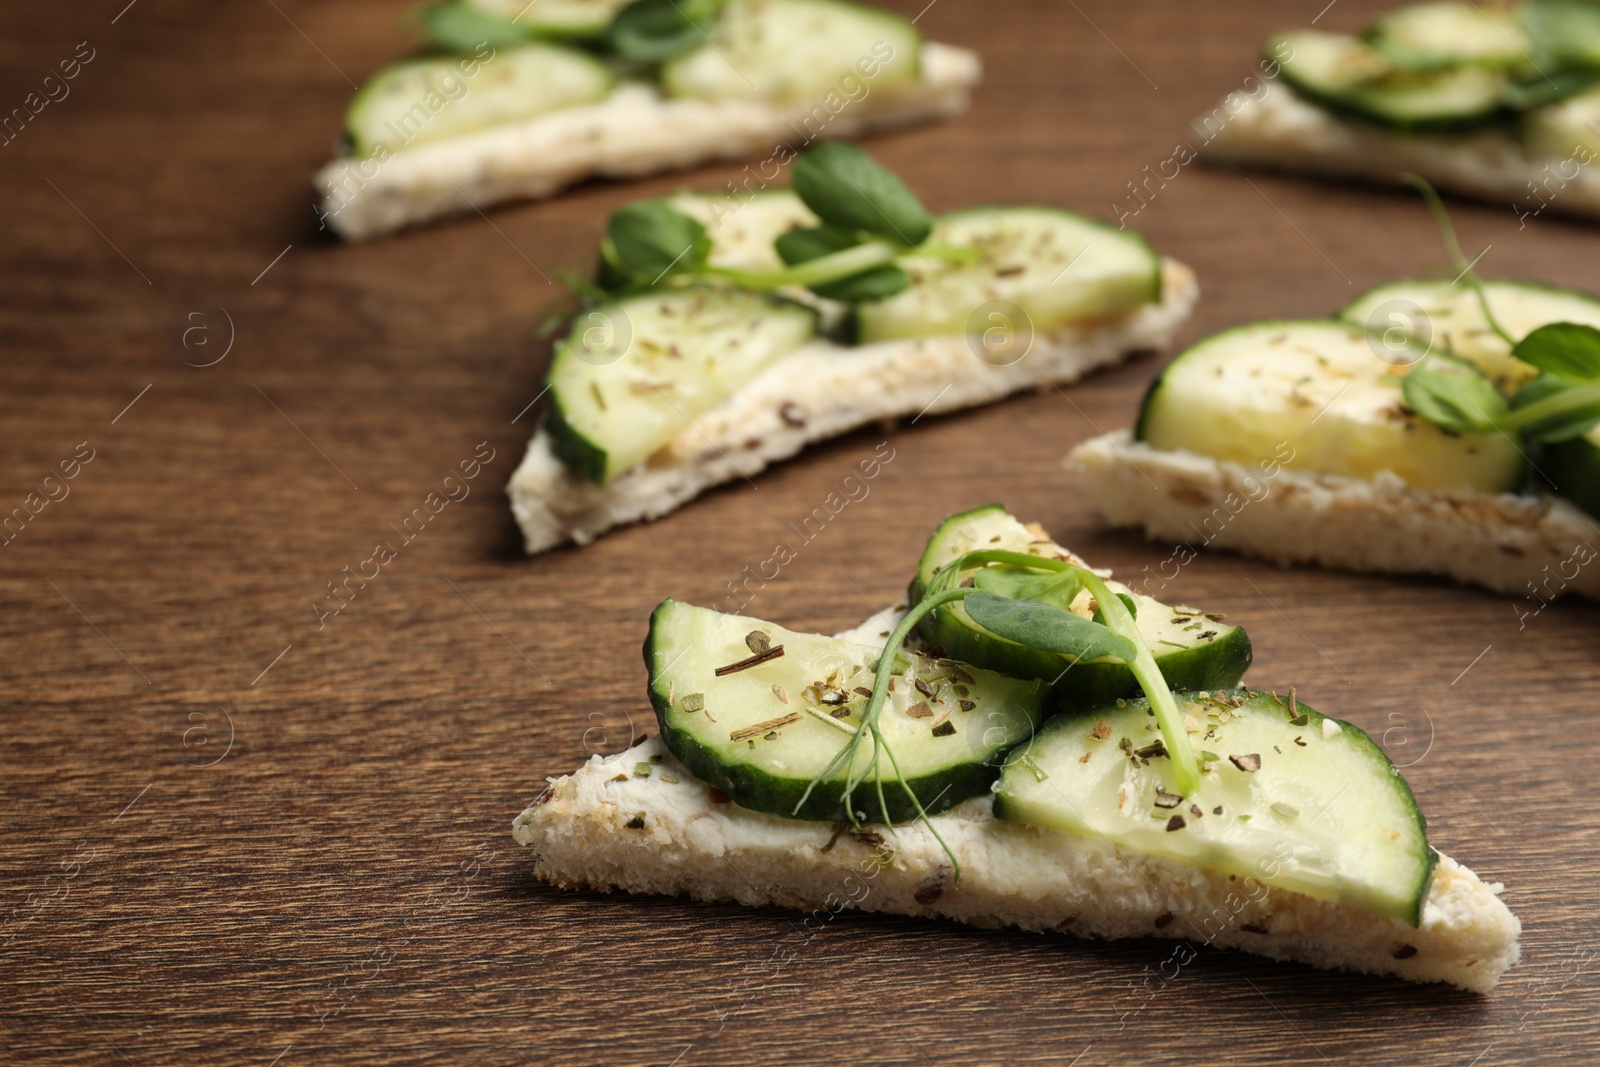 Photo of Tasty sandwiches with cream cheese, cucumber and microgreens on wooden table, closeup